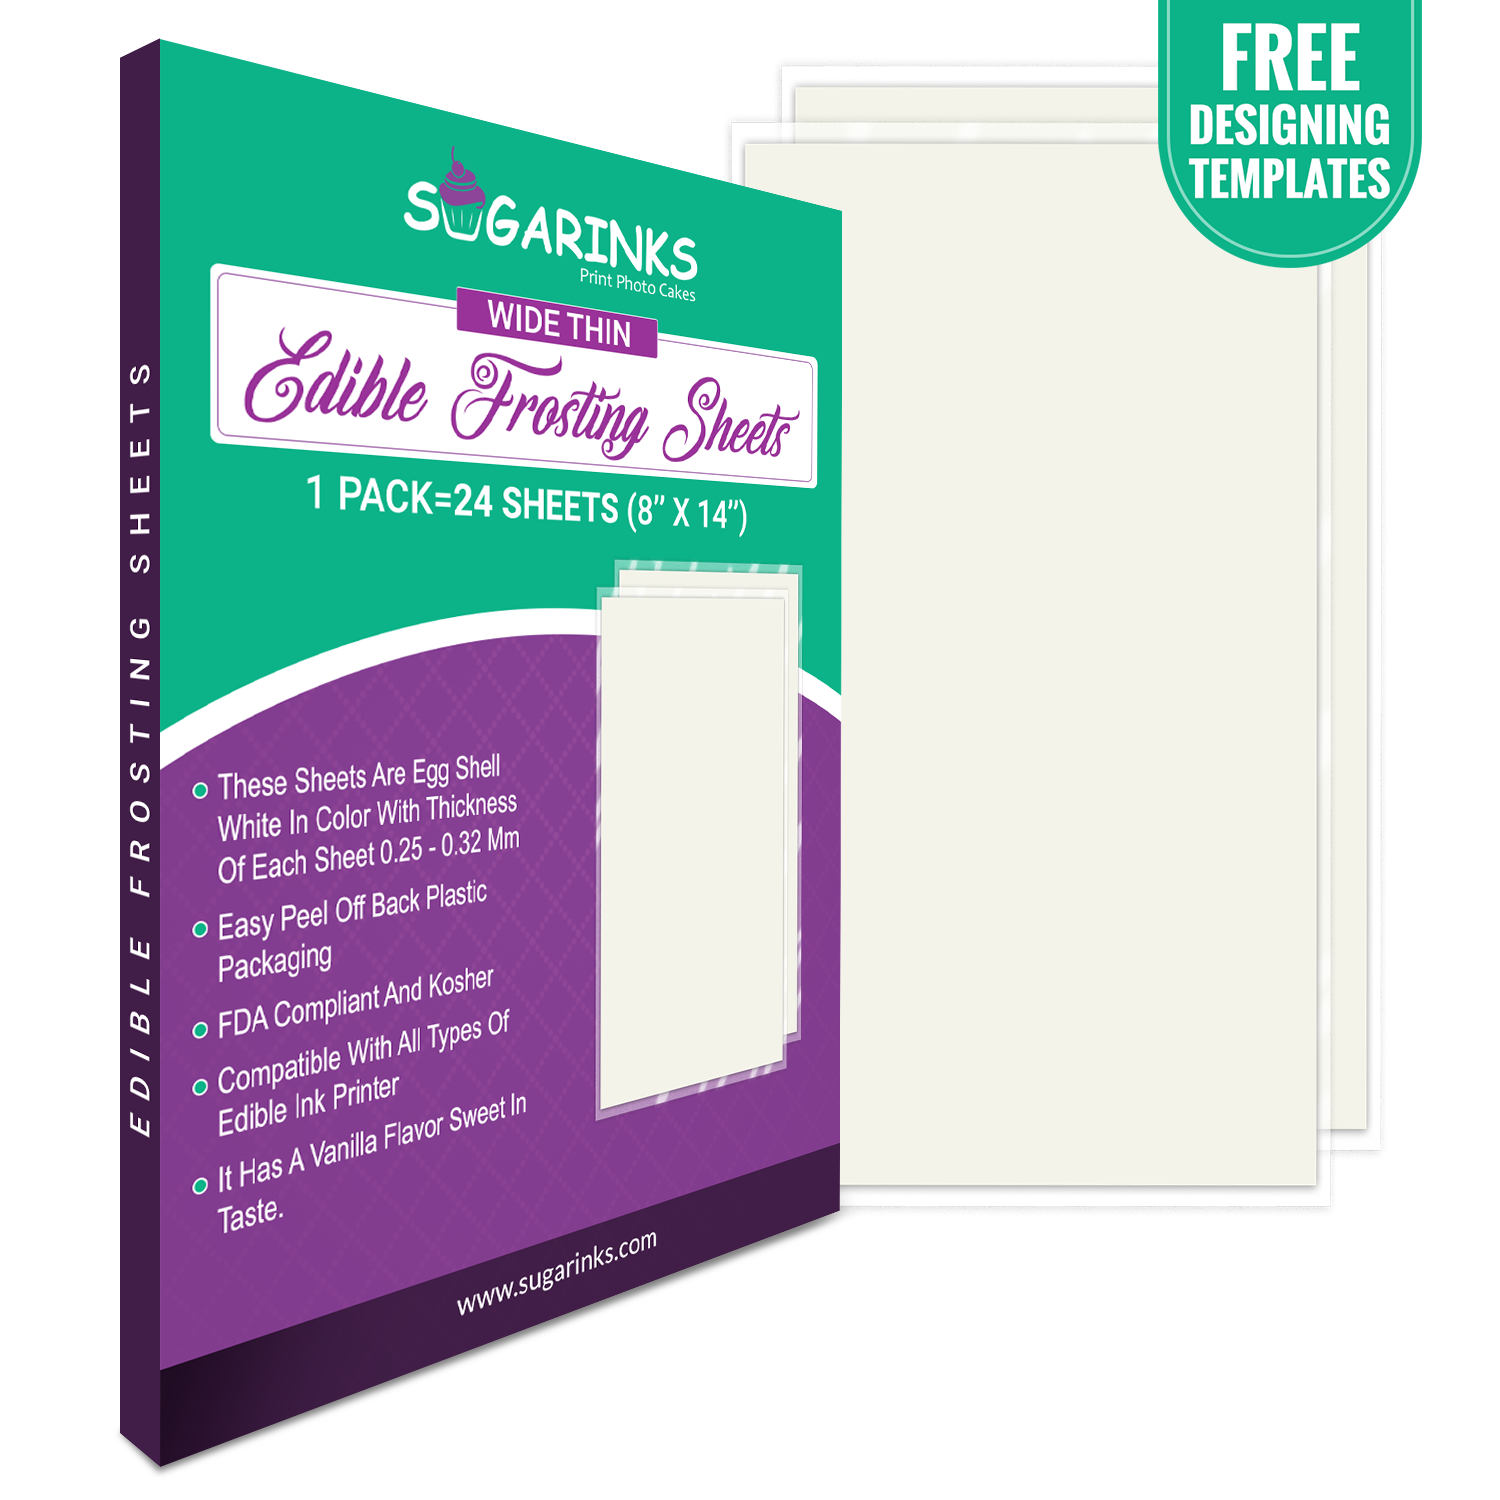 Sugarinks Legal Size Superior Thin Frosting Sheets A4 Size (8”X14”) Pack of 24